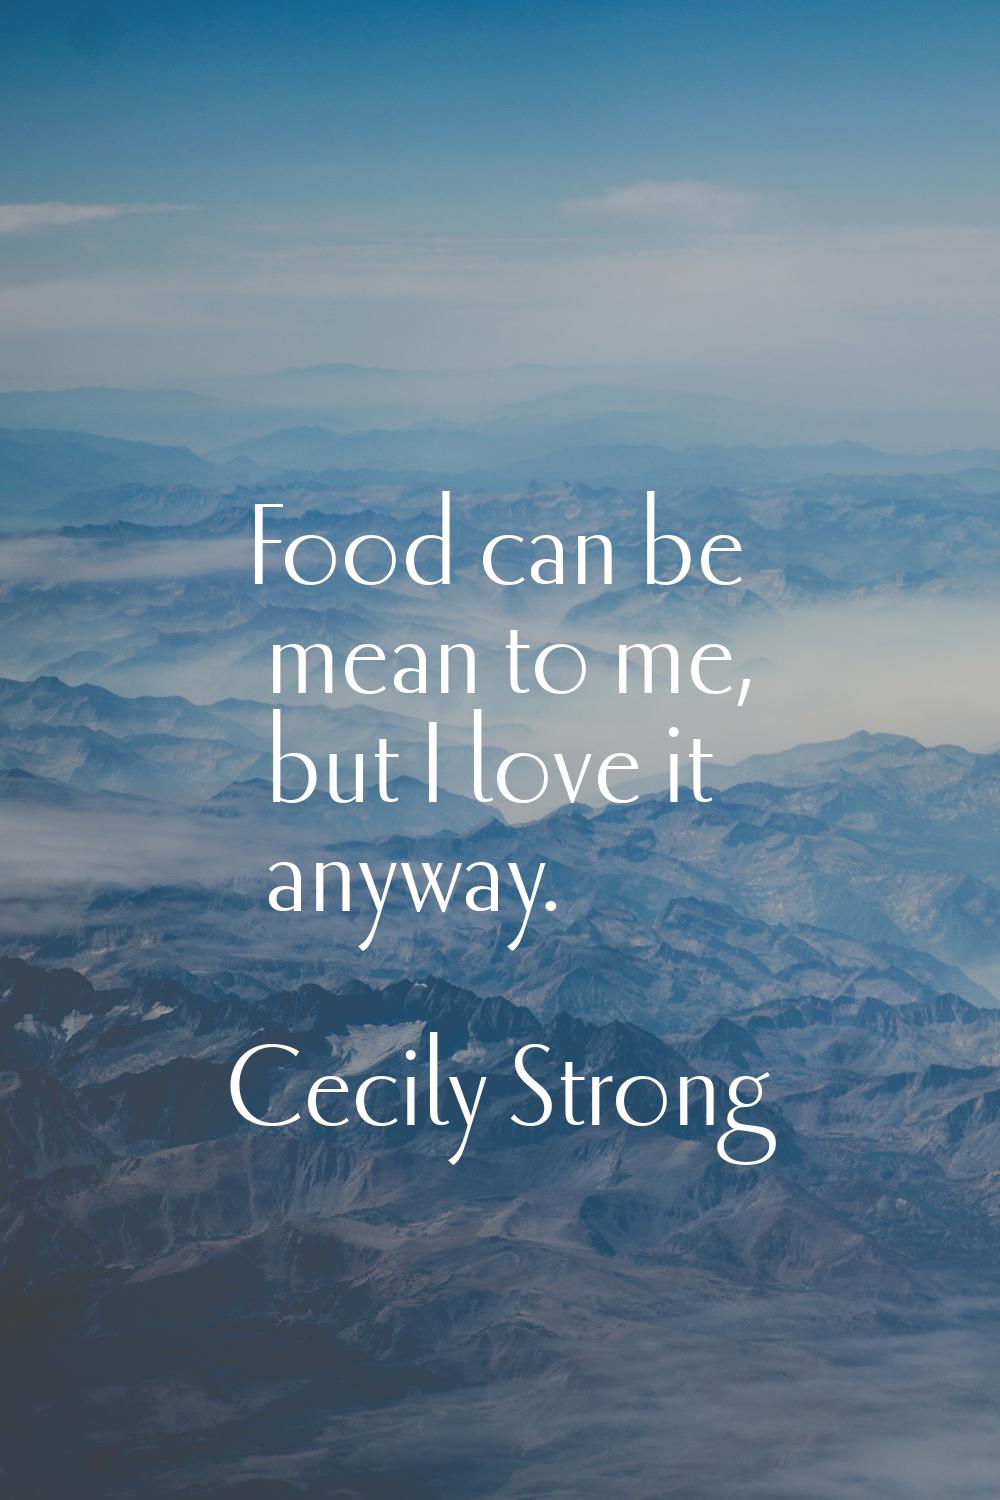 Food can be mean to me, but I love it anyway.